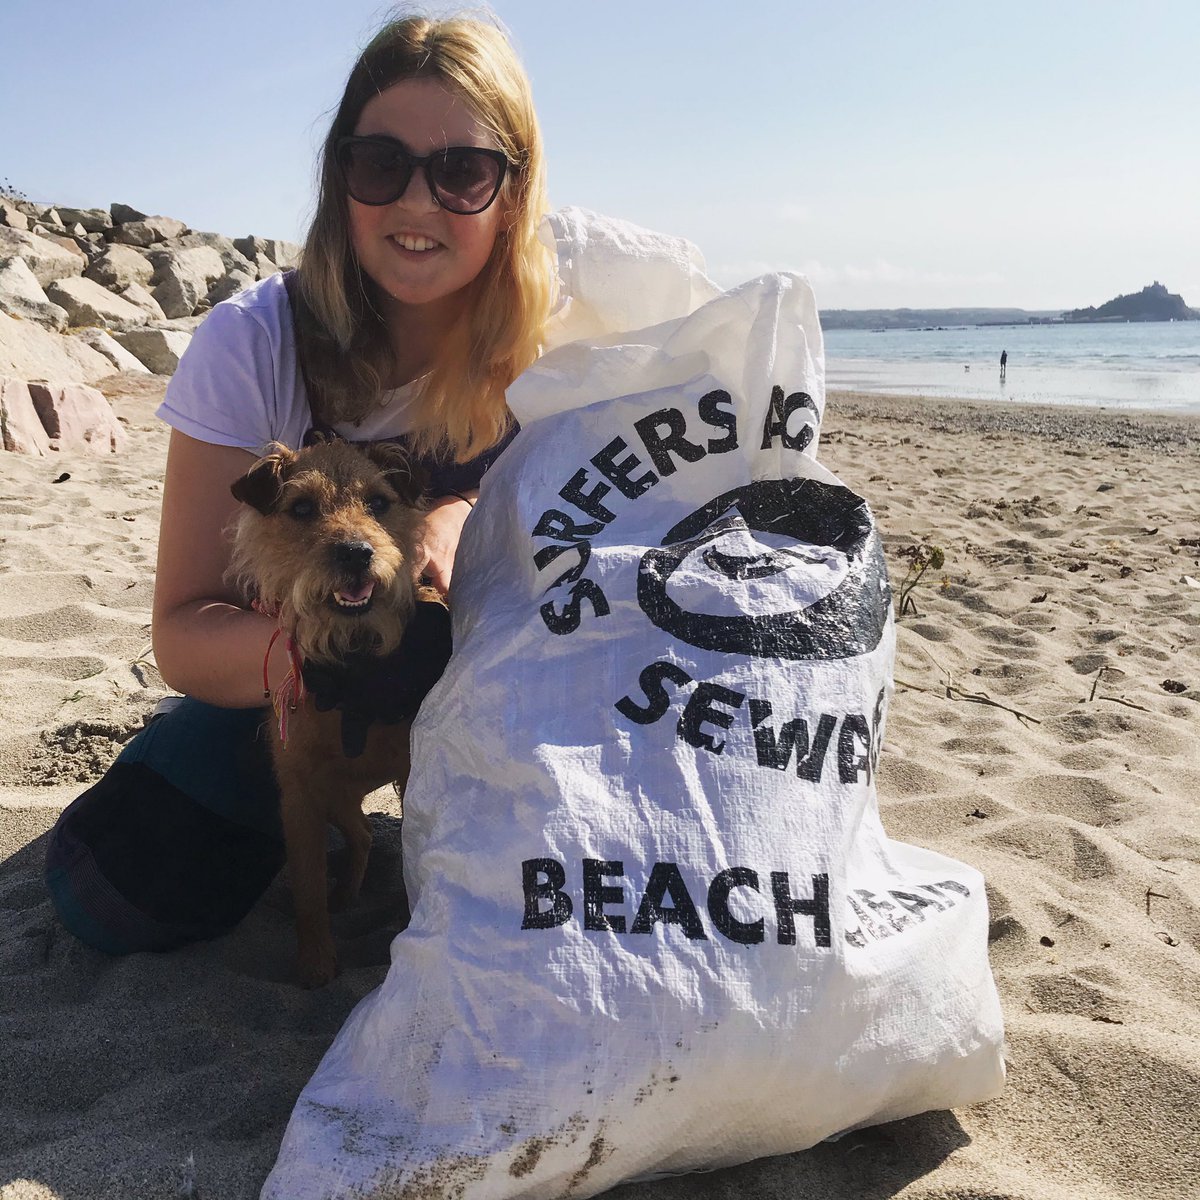 Beach Clean today! 10am at the @hoxtonspecial 😍 Kit provided - just turn up and say hi 👋 #MillionMileClean #PlasticFreeZ #PlasticFreeCommunities #BeachClean #BrandAudit @sascampaigns